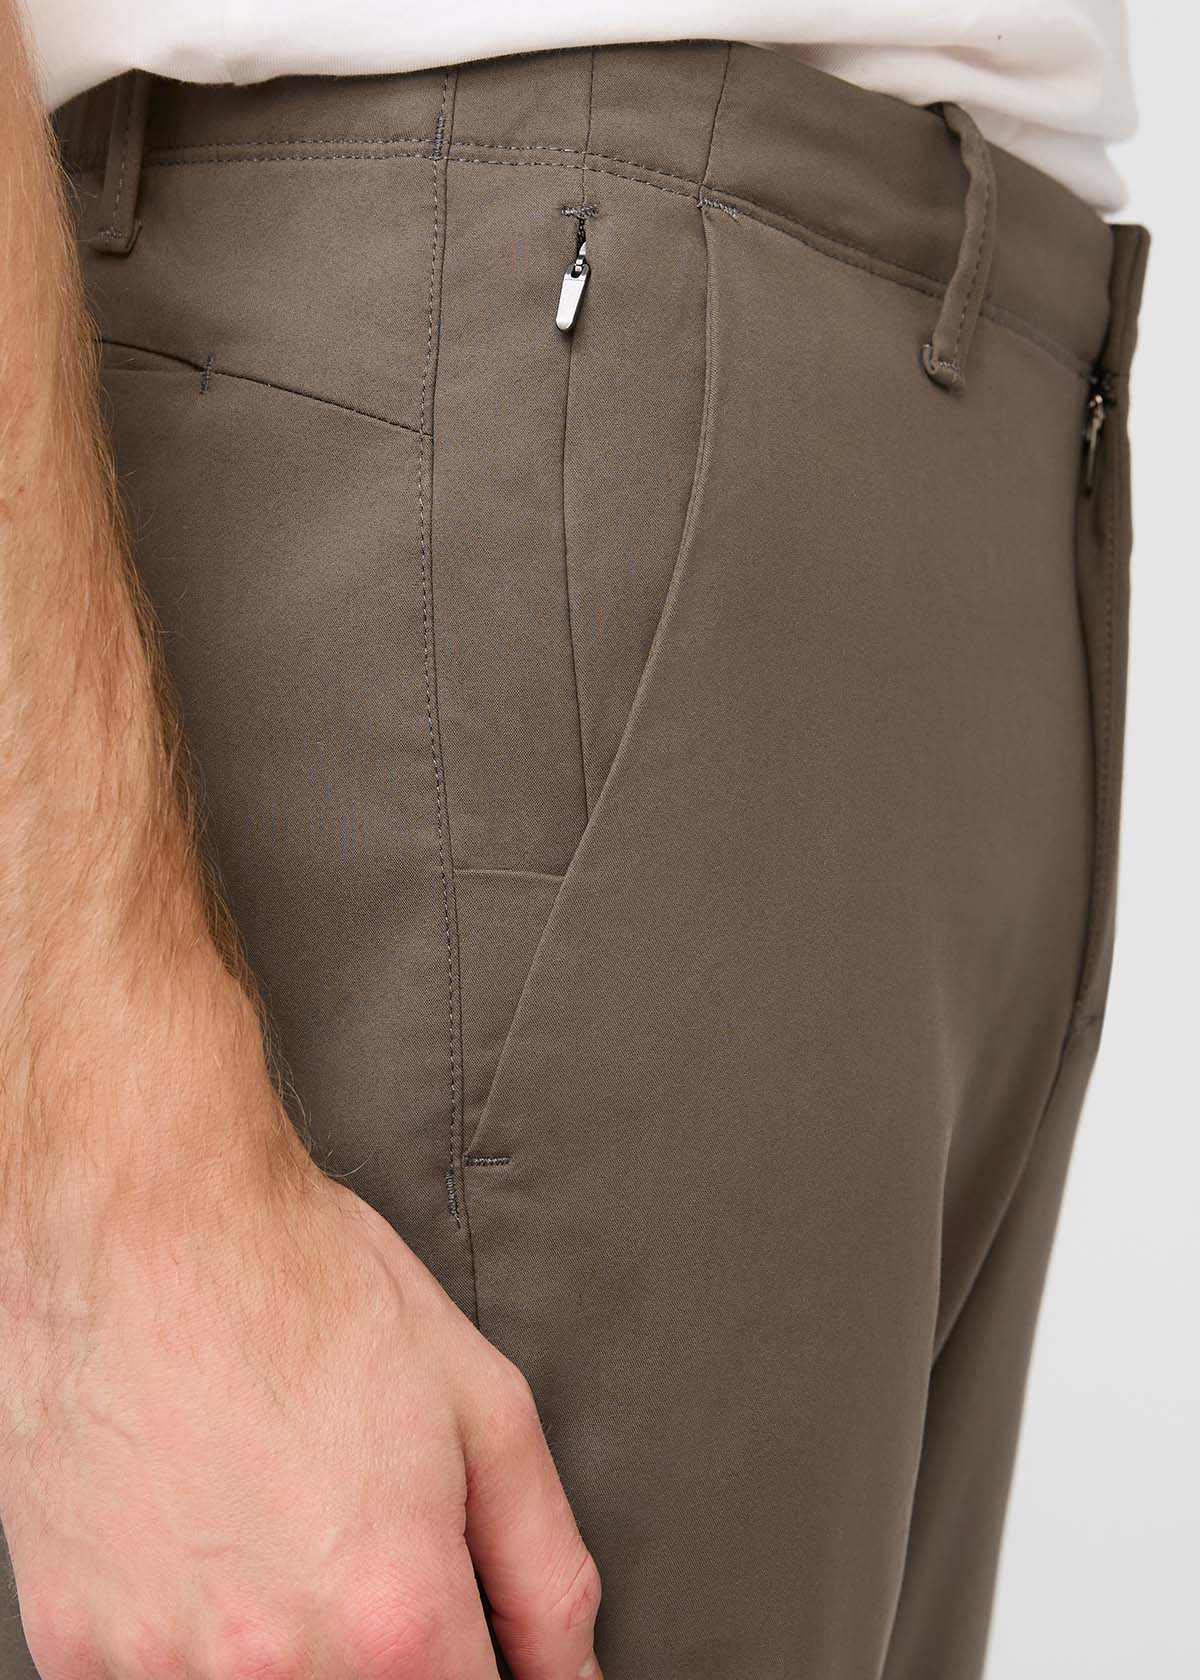 Bandana Cargo Pants For Men Zip Pocket, Running Friendly Trousers With High  Quality Fabric From You04, $23.1 | DHgate.Com